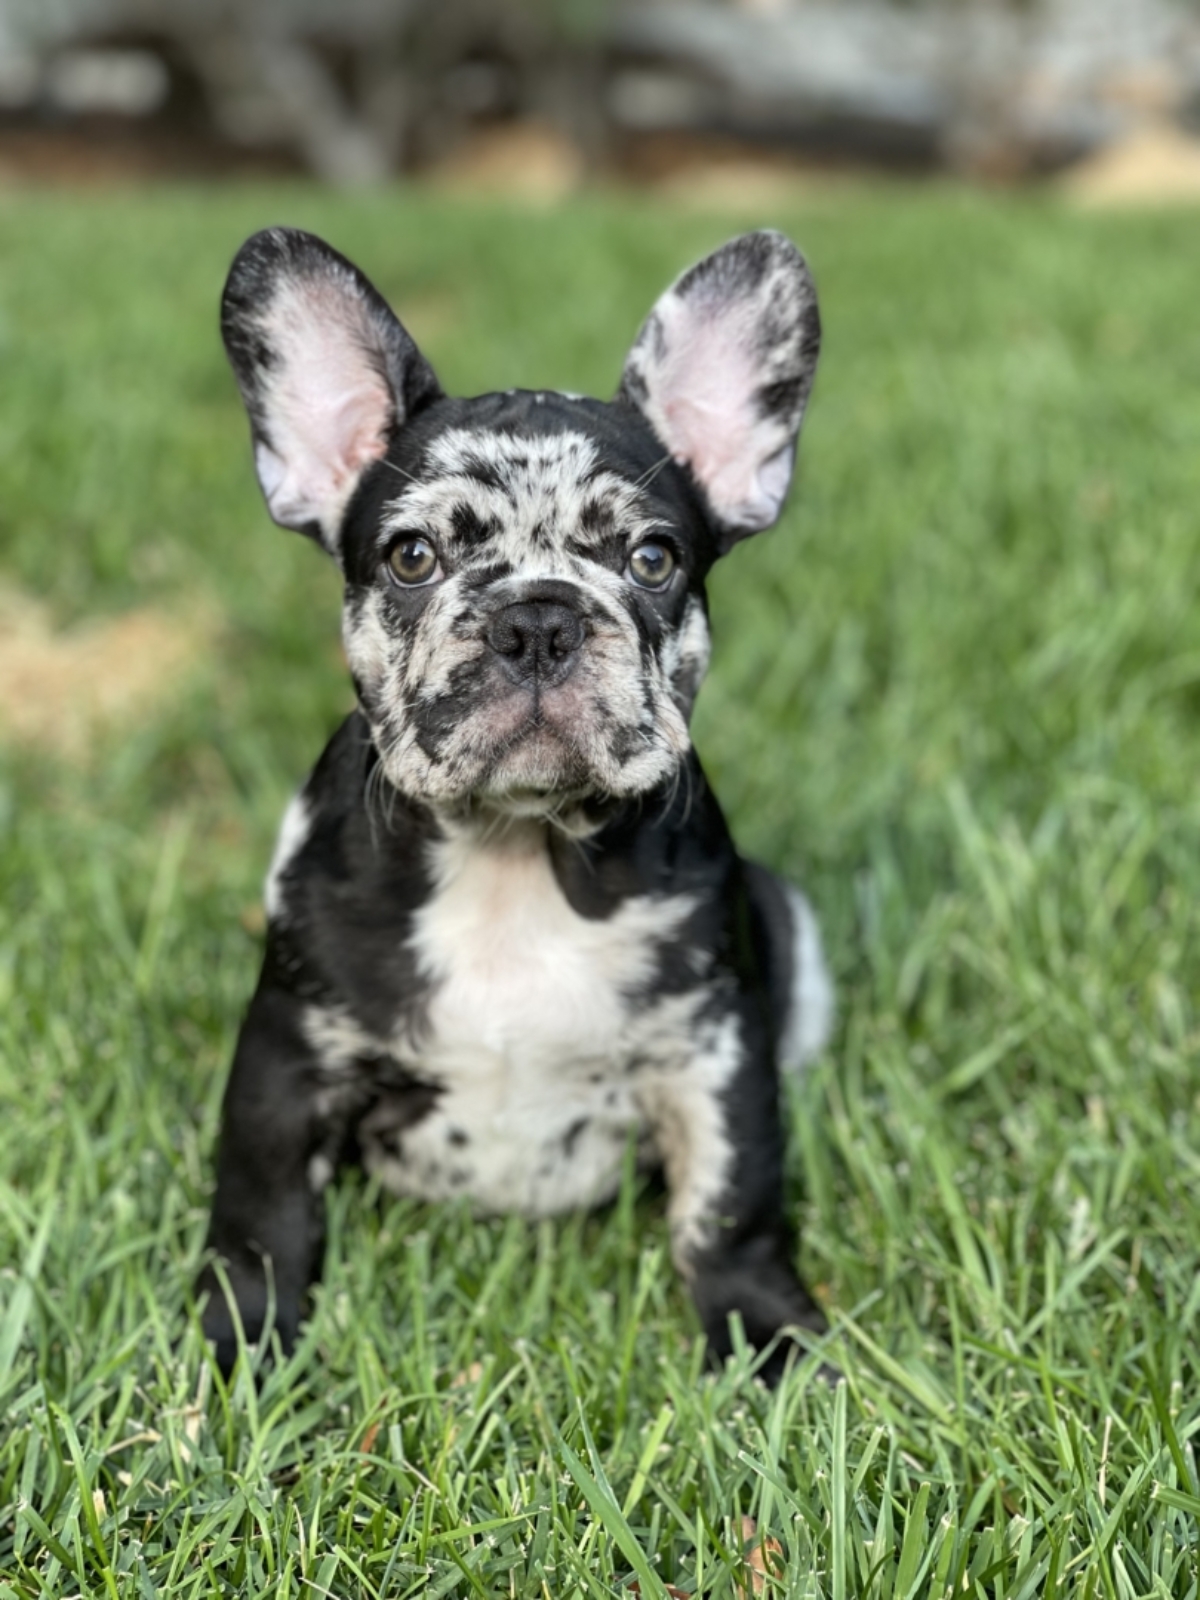 how much is a black merle french bulldog?